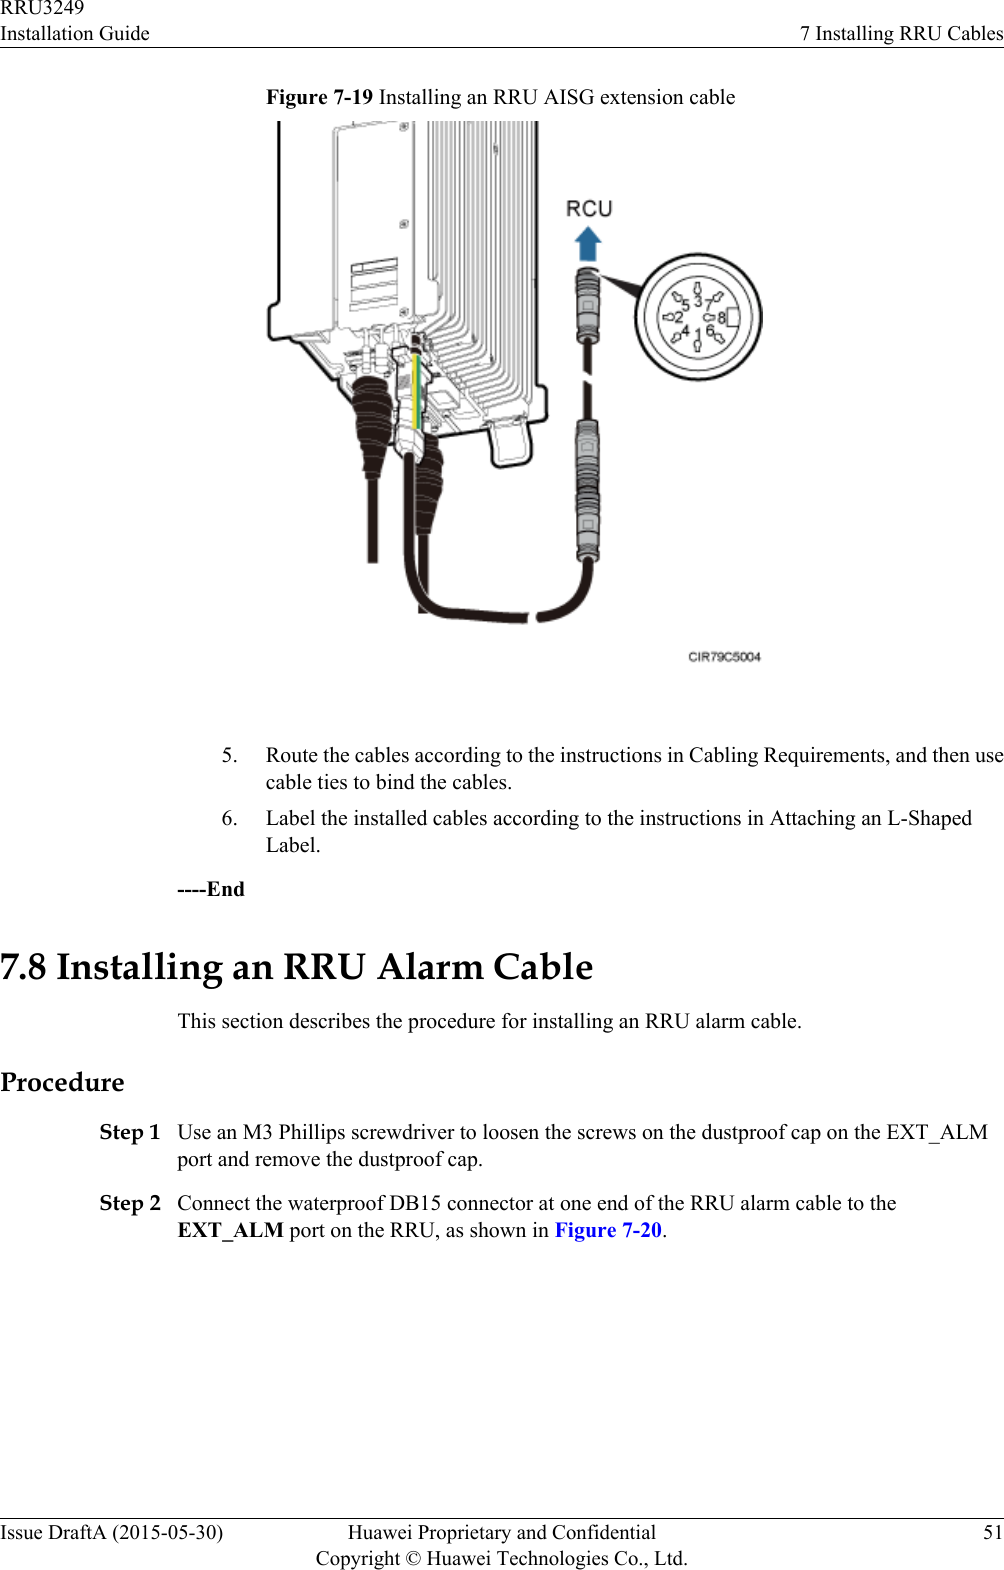 Figure 7-19 Installing an RRU AISG extension cable 5. Route the cables according to the instructions in Cabling Requirements, and then usecable ties to bind the cables.6. Label the installed cables according to the instructions in Attaching an L-ShapedLabel.----End7.8 Installing an RRU Alarm CableThis section describes the procedure for installing an RRU alarm cable.ProcedureStep 1 Use an M3 Phillips screwdriver to loosen the screws on the dustproof cap on the EXT_ALMport and remove the dustproof cap.Step 2 Connect the waterproof DB15 connector at one end of the RRU alarm cable to theEXT_ALM port on the RRU, as shown in Figure 7-20.RRU3249Installation Guide 7 Installing RRU CablesIssue DraftA (2015-05-30) Huawei Proprietary and ConfidentialCopyright © Huawei Technologies Co., Ltd.51